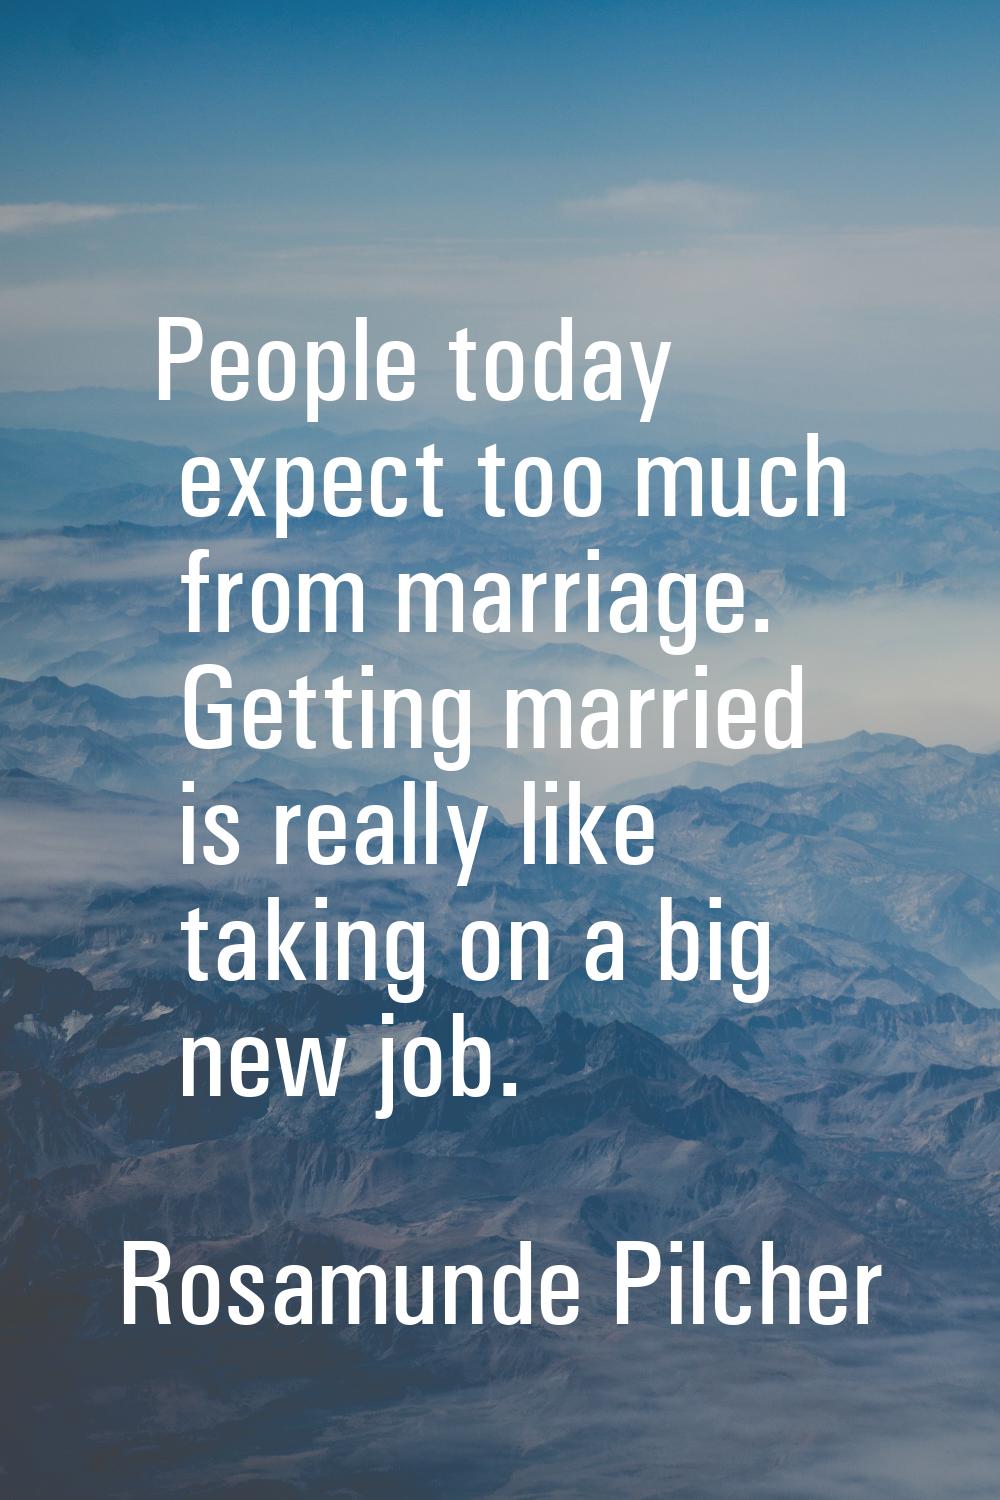 People today expect too much from marriage. Getting married is really like taking on a big new job.